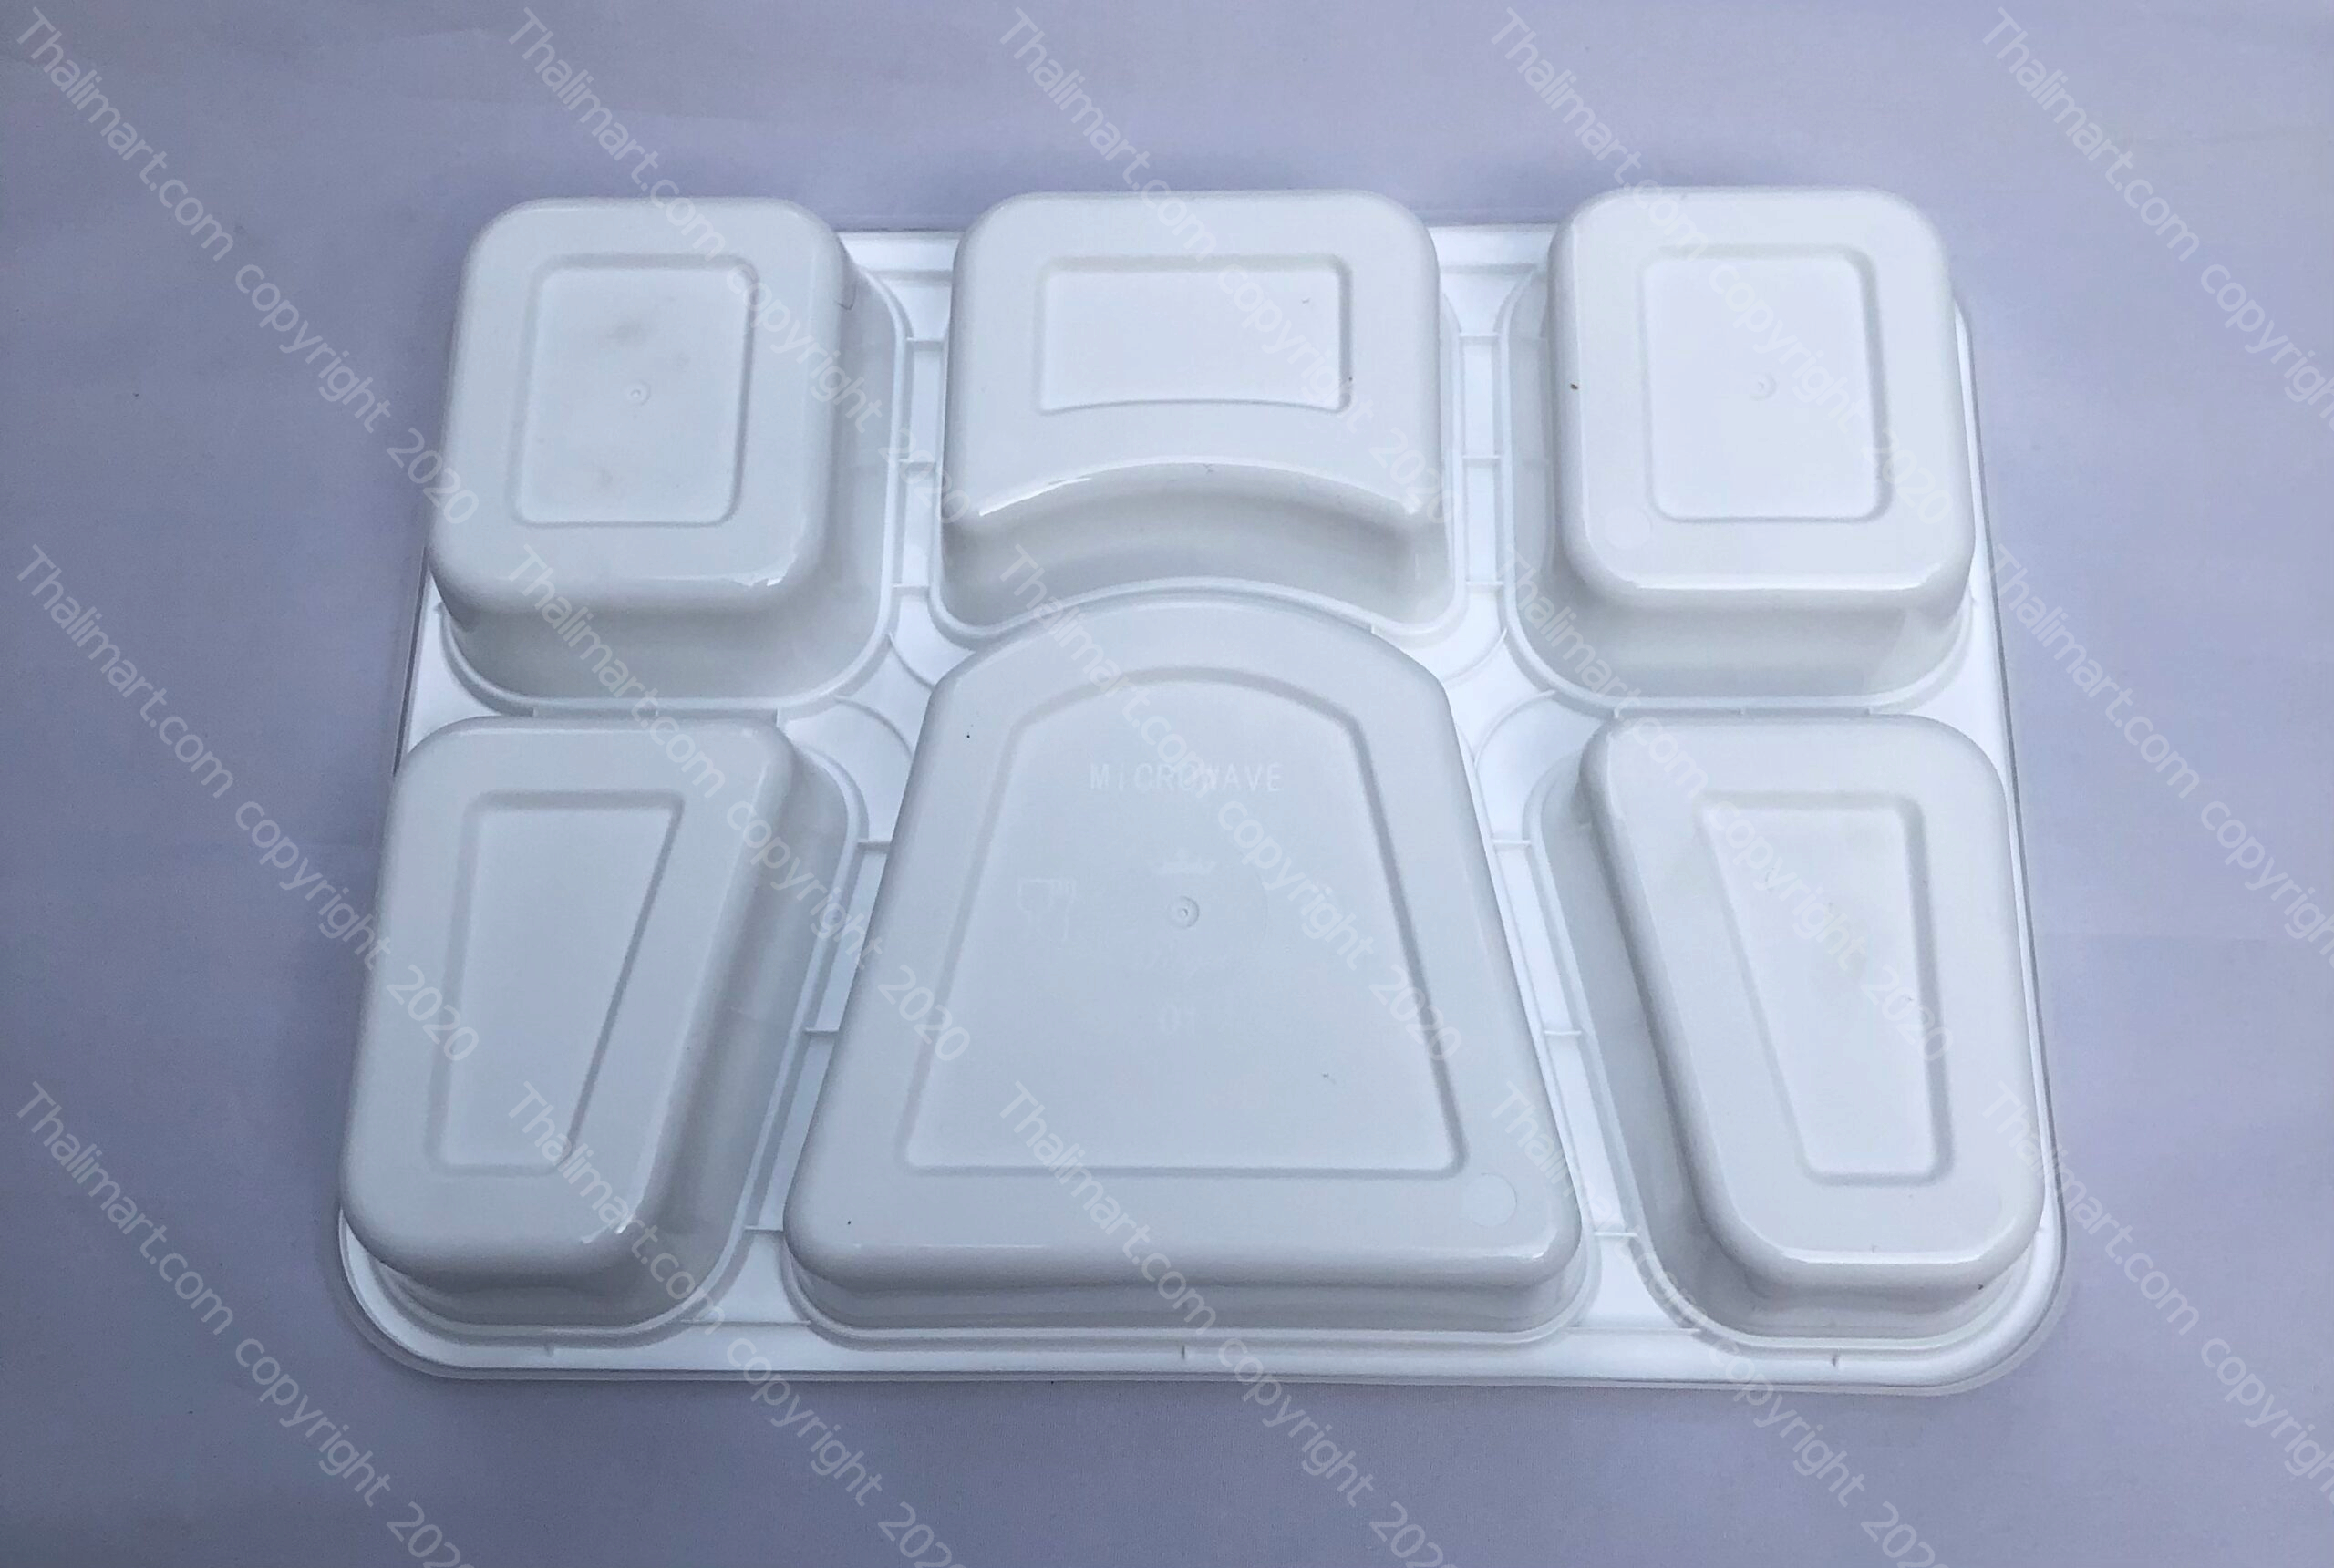 https://www.desiclik.com/images/D/6%20compartment%20food%20grade%20plastic%20plate%20with%20lid%20microwave%20safe%20leak%20resistant%20snap%20on%20tight%20lid%204.jpg